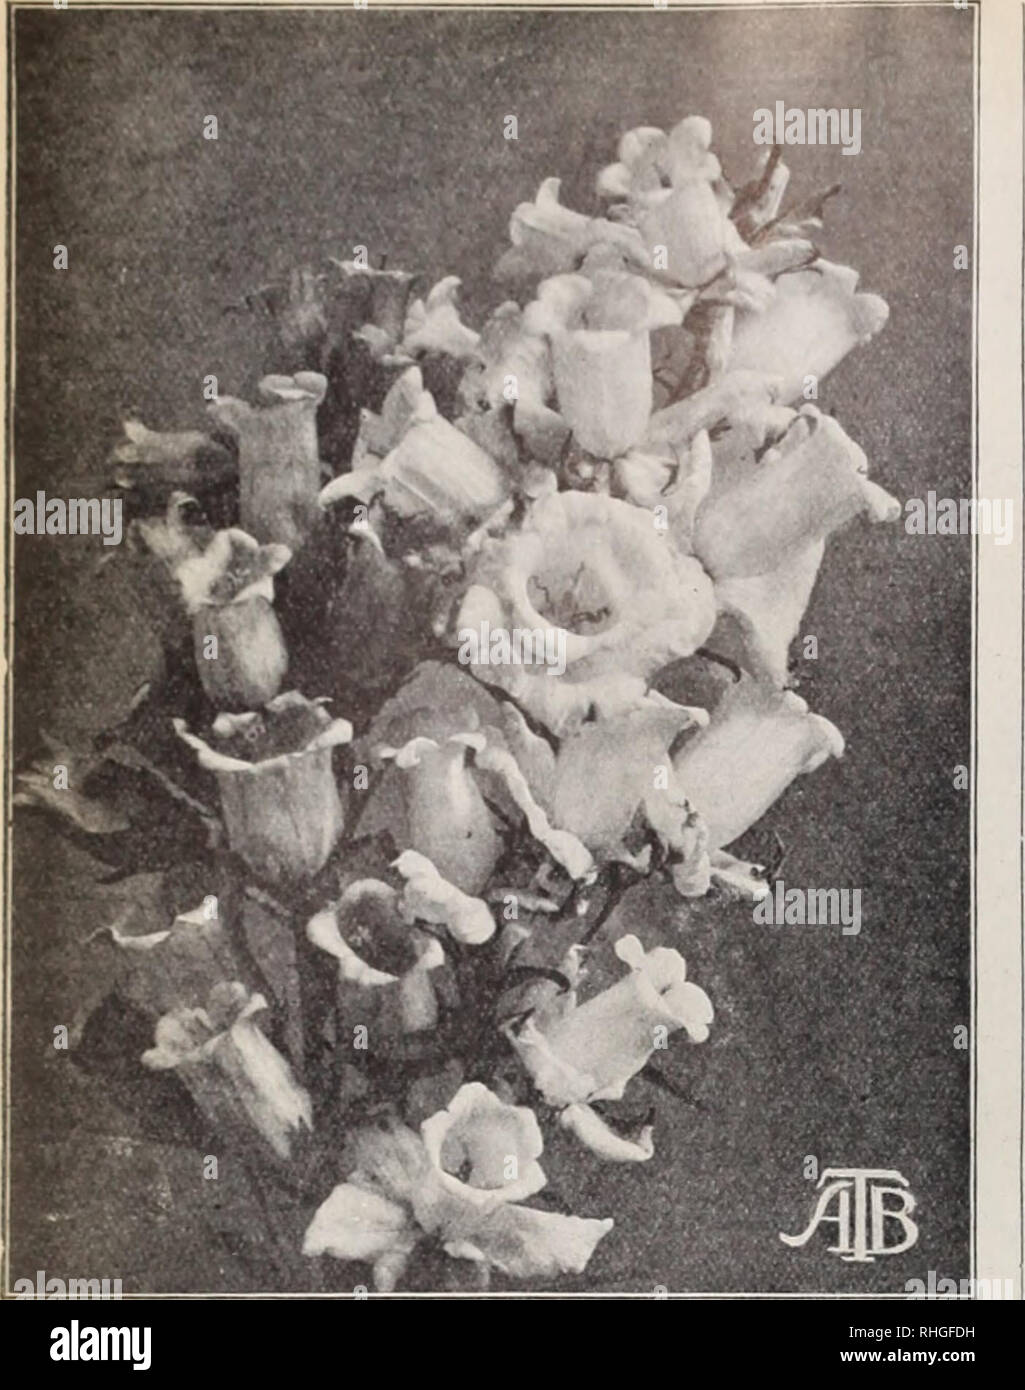 . Boddington's quality bulbs, seeds and plants / Arthur T. Boddington.. Nursery Catalogue. 20 Arthur T.Boddington-. 342 West 14th St.. New Vork City. Campanula Media (Cup and Saucer i Candytuft (Iberis) ha. BODDINGTON'S GIANT HYACINTH-FLOW- Pkt. Oz. ERED. Large pure white spiral spikes $o 35 Empress, i tt. Pure white pyramidal 10 $0 50 White Rocket. Large trusses 05 30 Umbellata albida. Creamy white 05 30 &quot; carnea. i ft. Flesh-colored 05 40 &quot; lilacina. i ft. Lilac 05 25 &quot; carminea. i ft. Bright carmine 05 40 &quot; Queen of Italy. Light lilac; very free-flow- ering 10 50 &quot;  Stock Photo